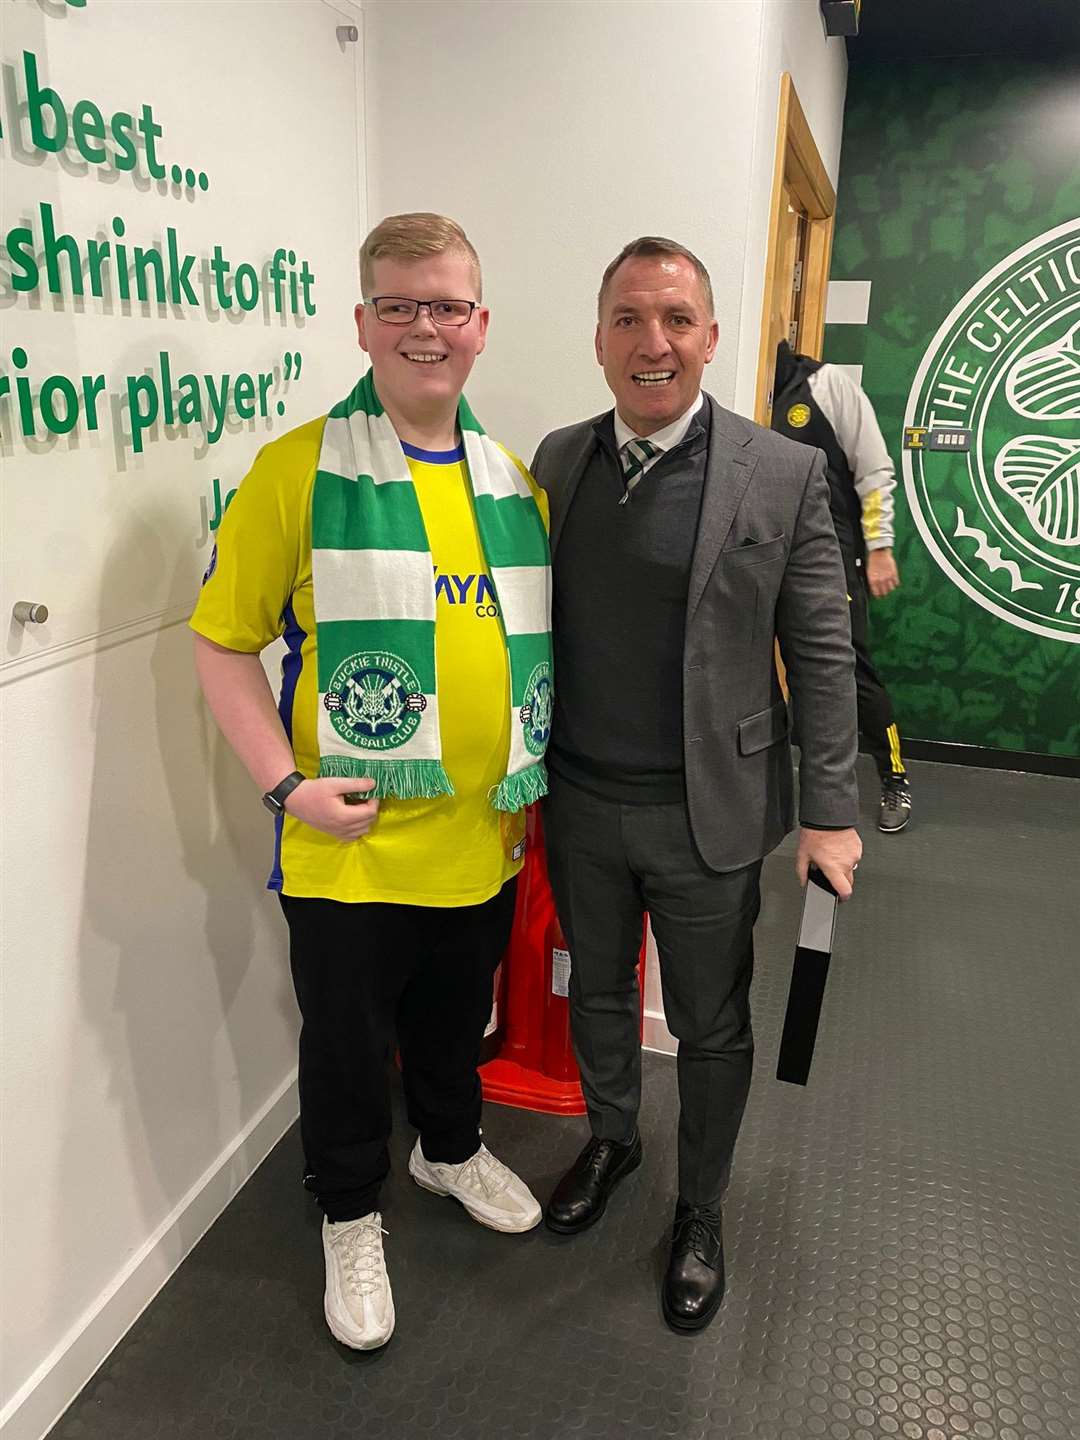 Brendan Rodgers met with Buckie Thistle super-fan Daniel Strong before and after the match at Parkhead.